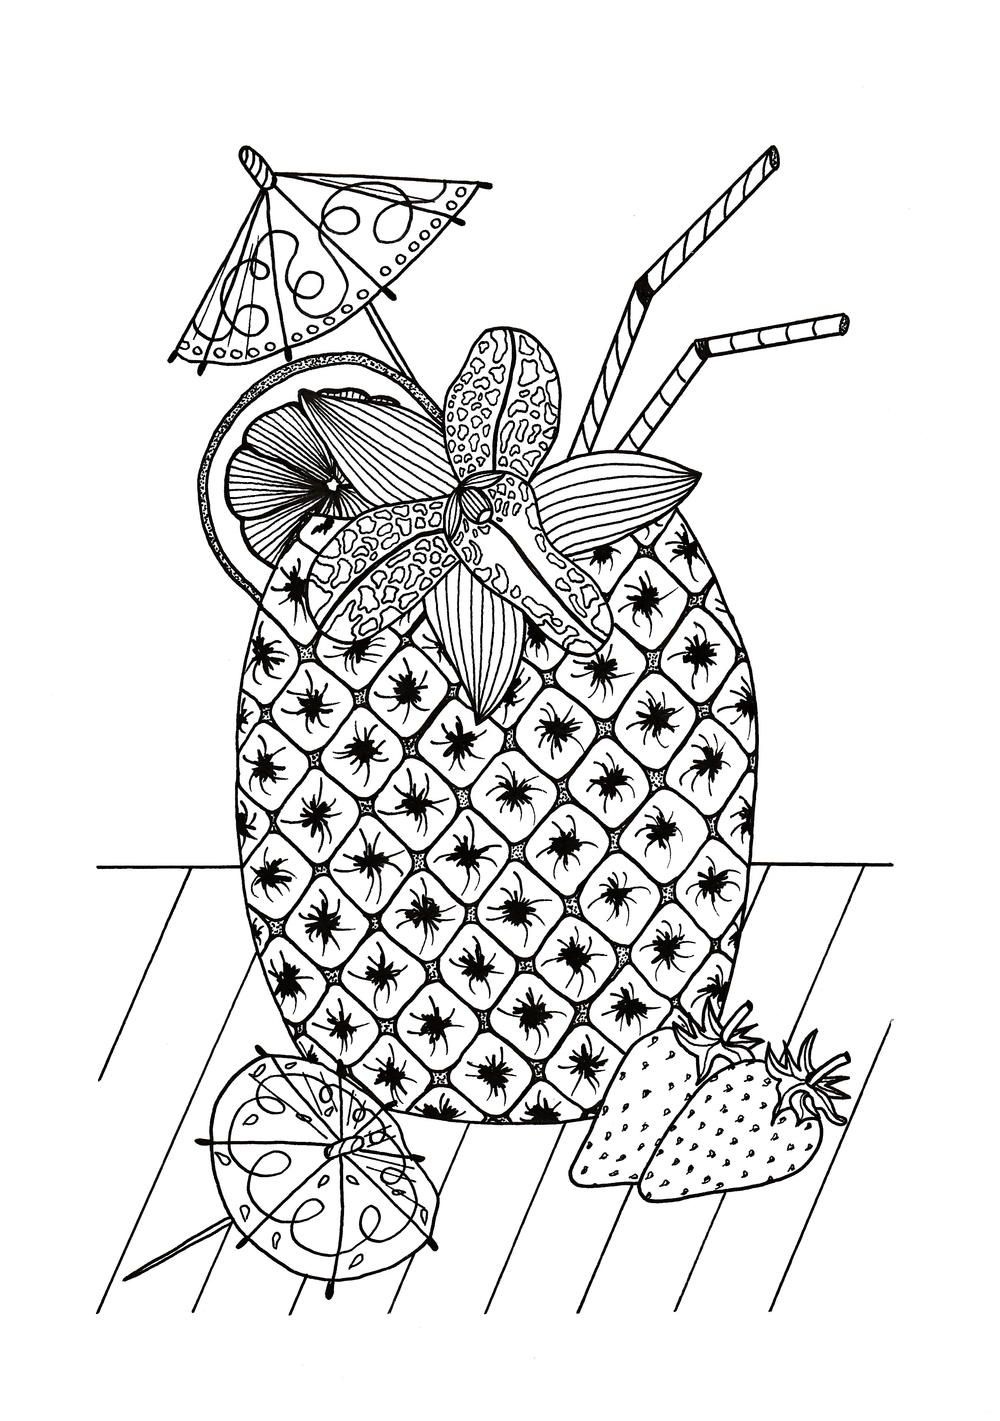 Tropical Island Cocktail Coloring Page | Free Adult Coloring Book - Free Printable Summer Coloring Pages For Adults